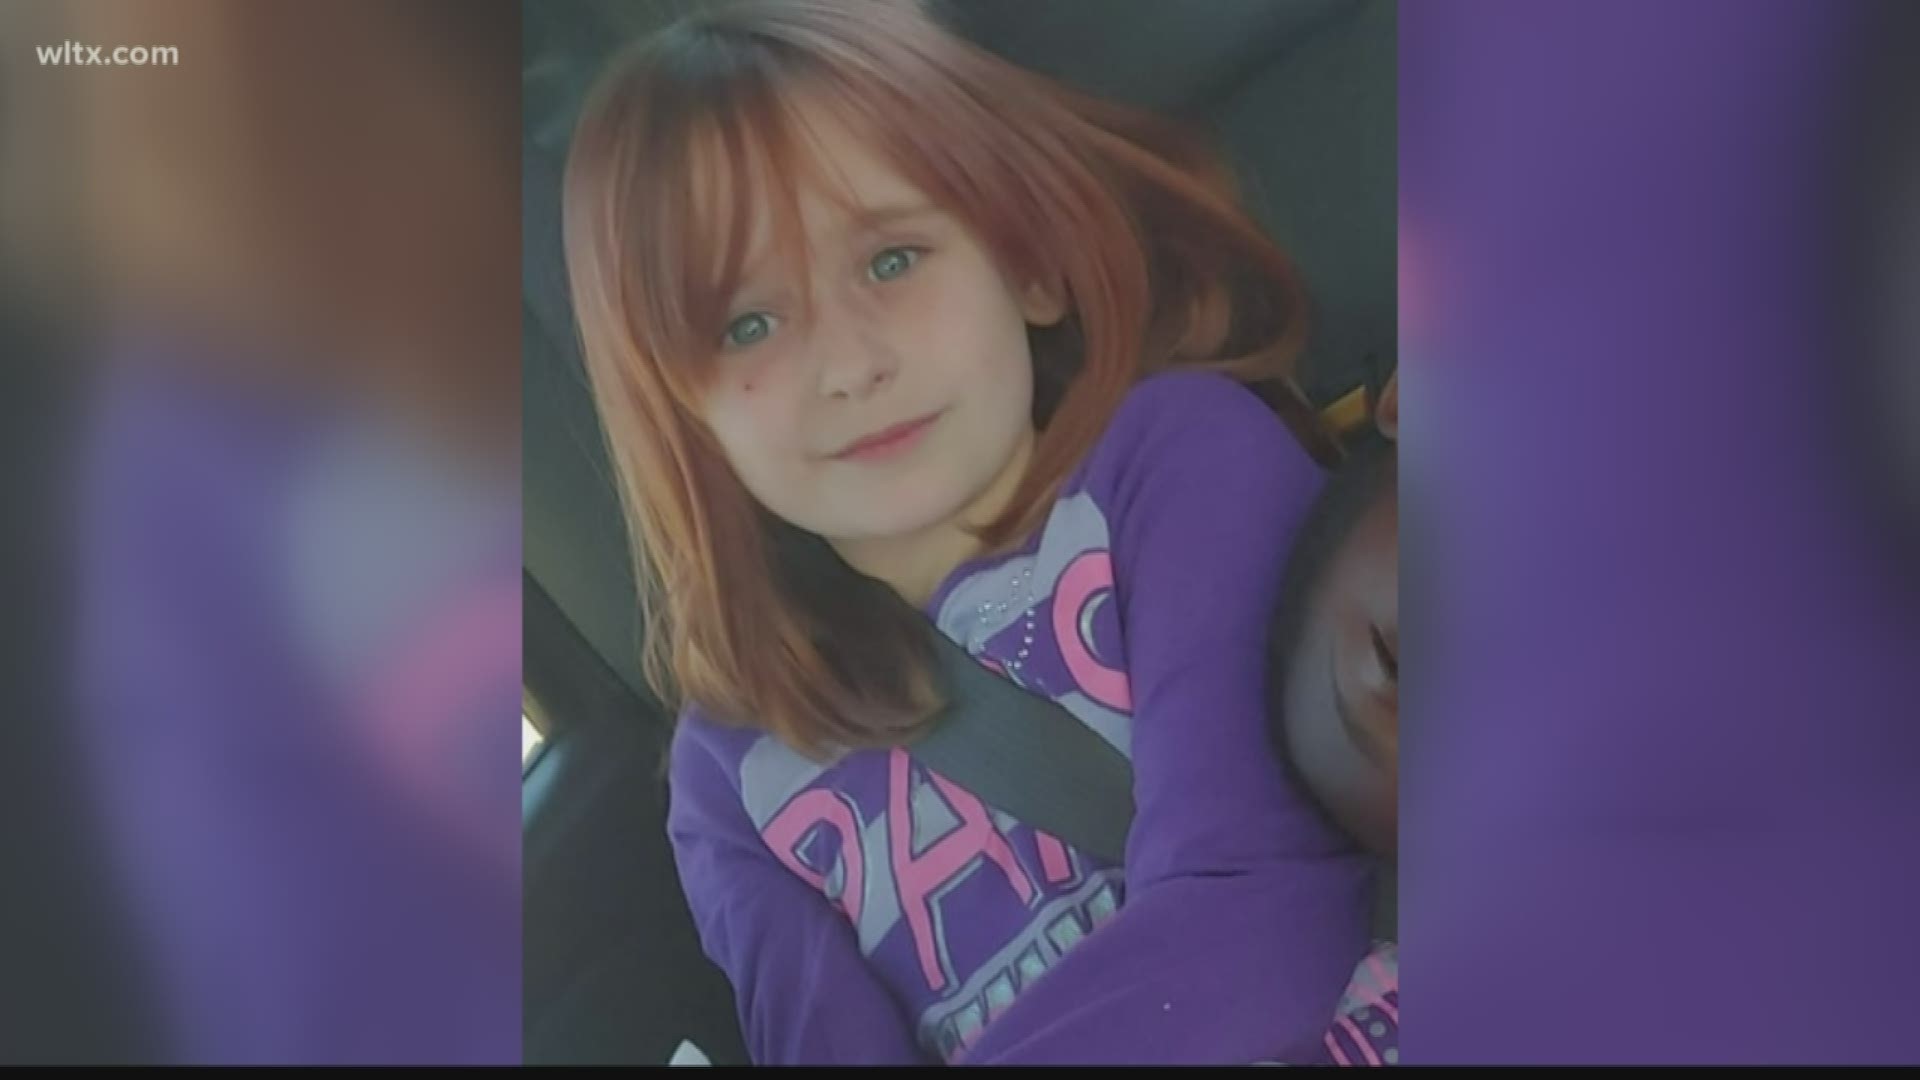 It's been eight days since 6-year-old Faye Swetlik disappeared and today the coroner revealed the child's cause of death.